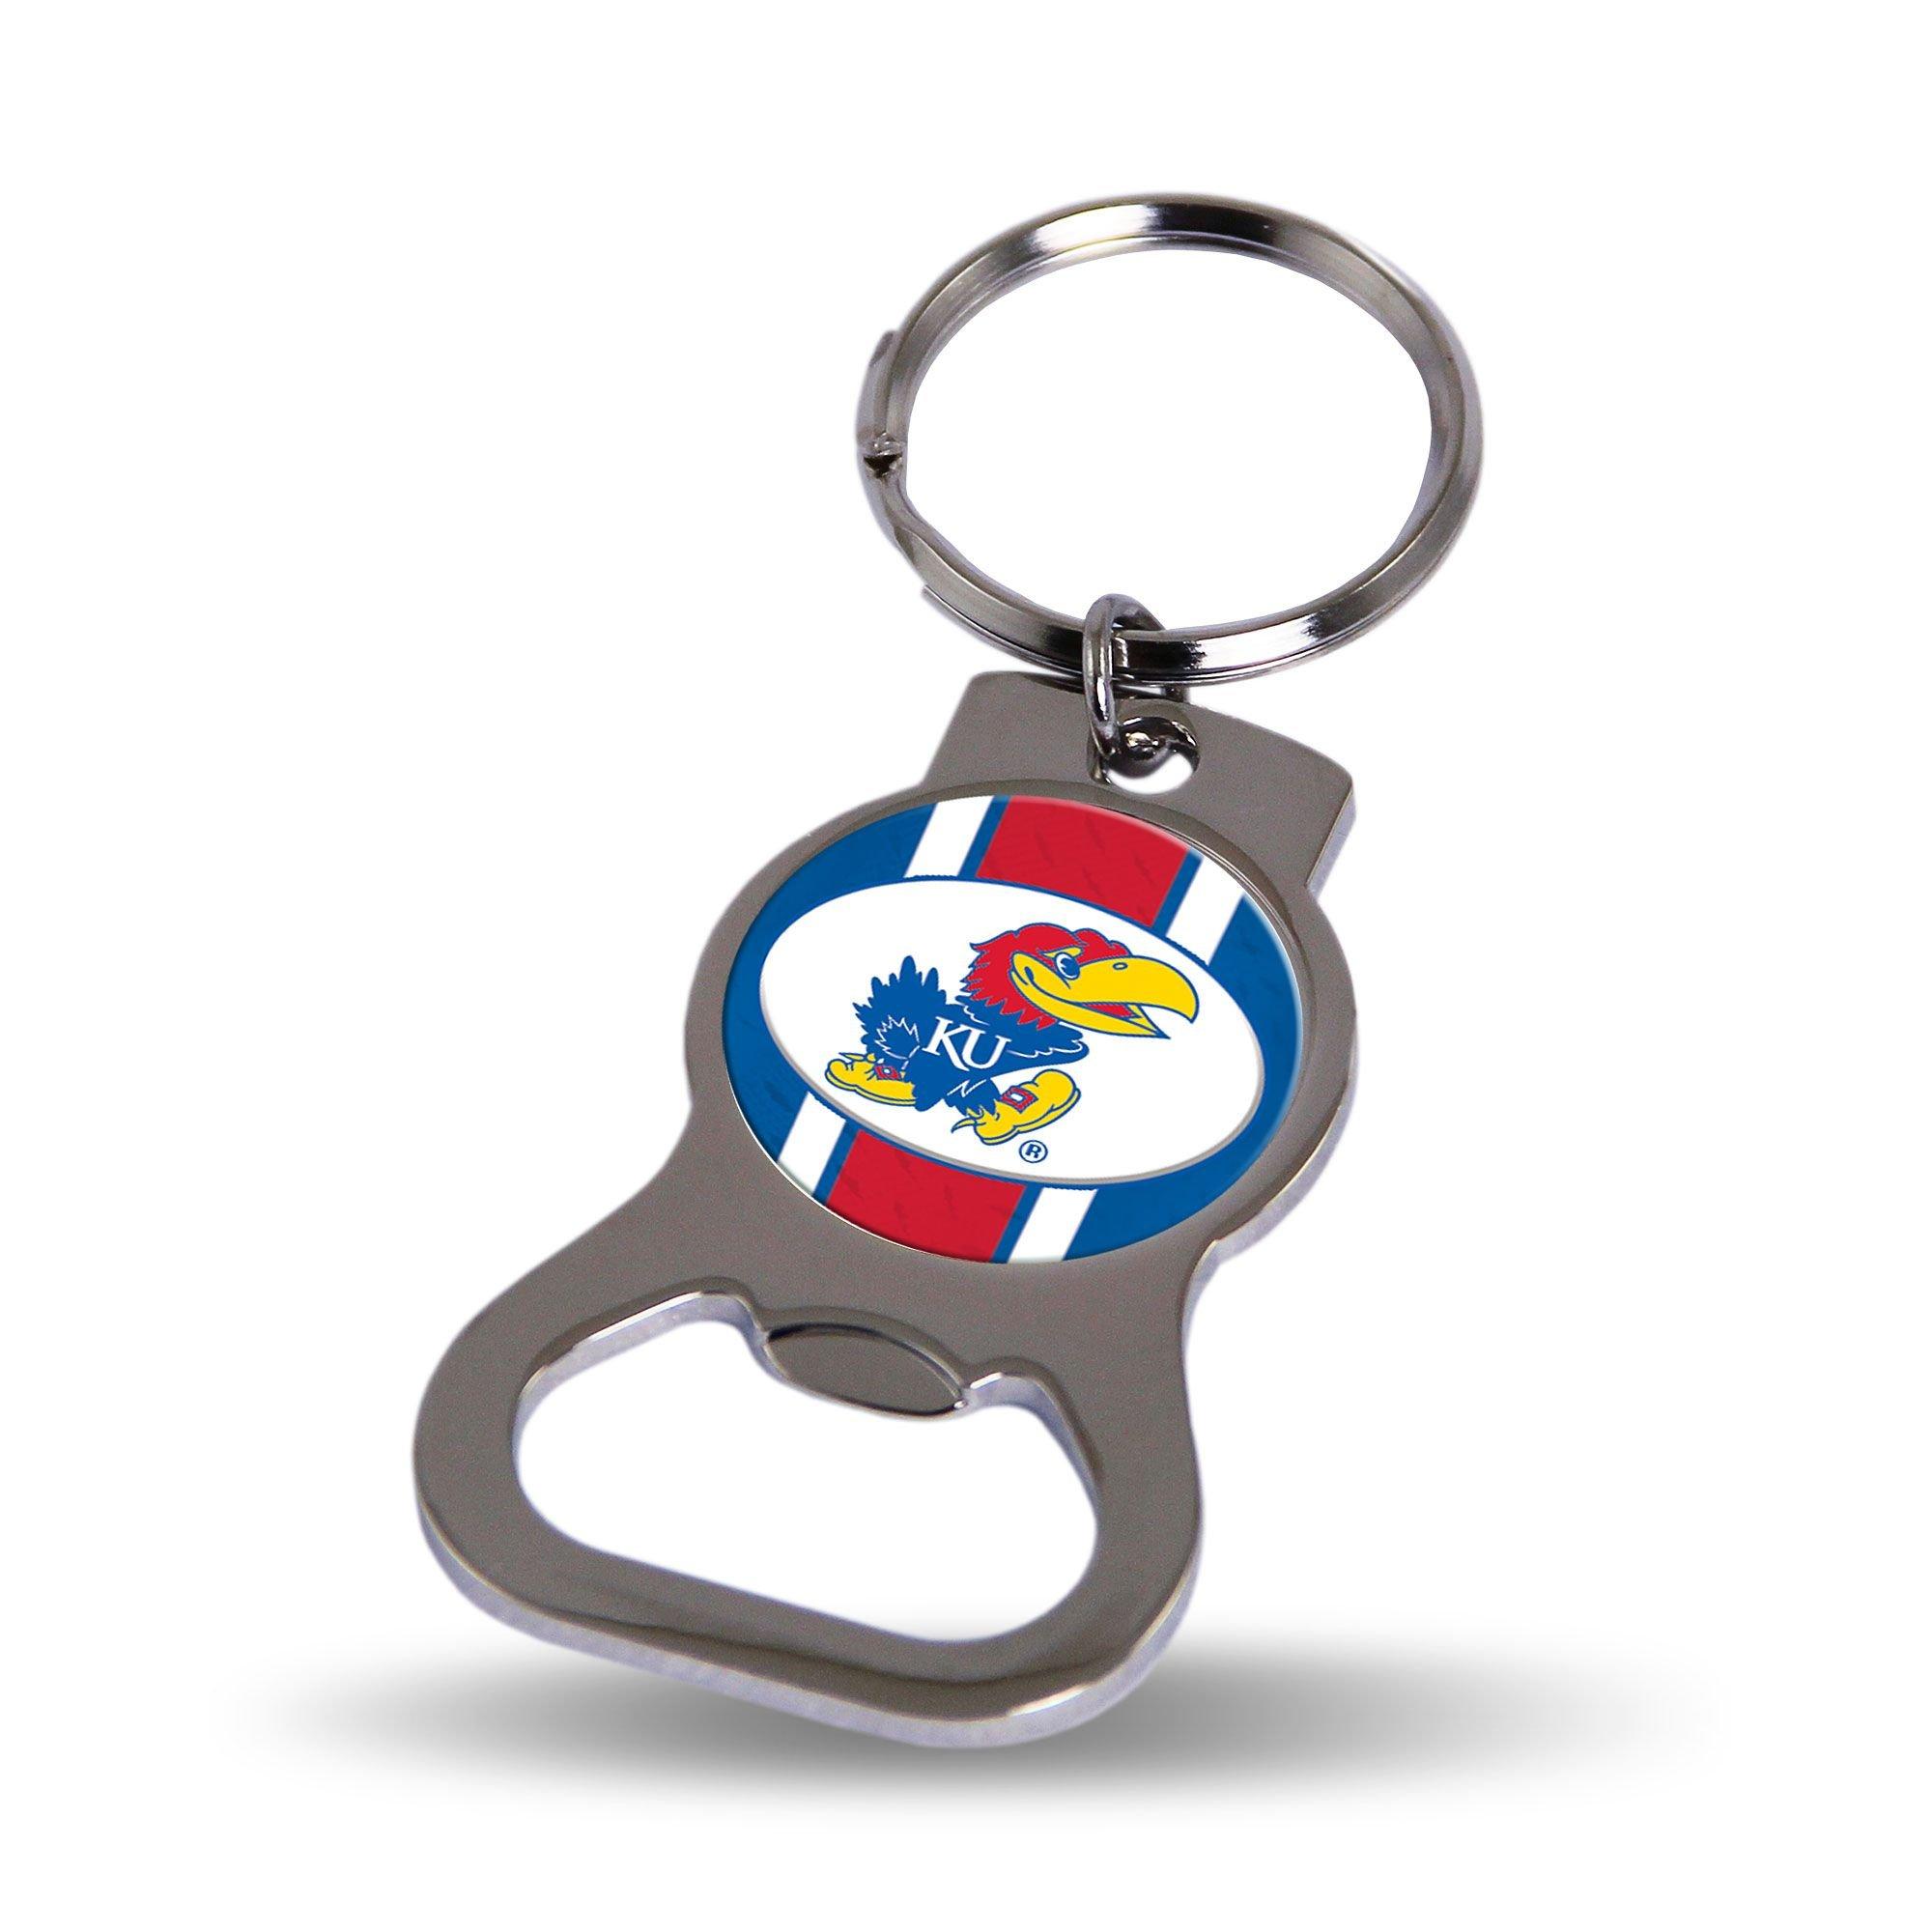 Louisiana Superdome Keychain with Snap Hook Closure - general for sale - by  owner - craigslist